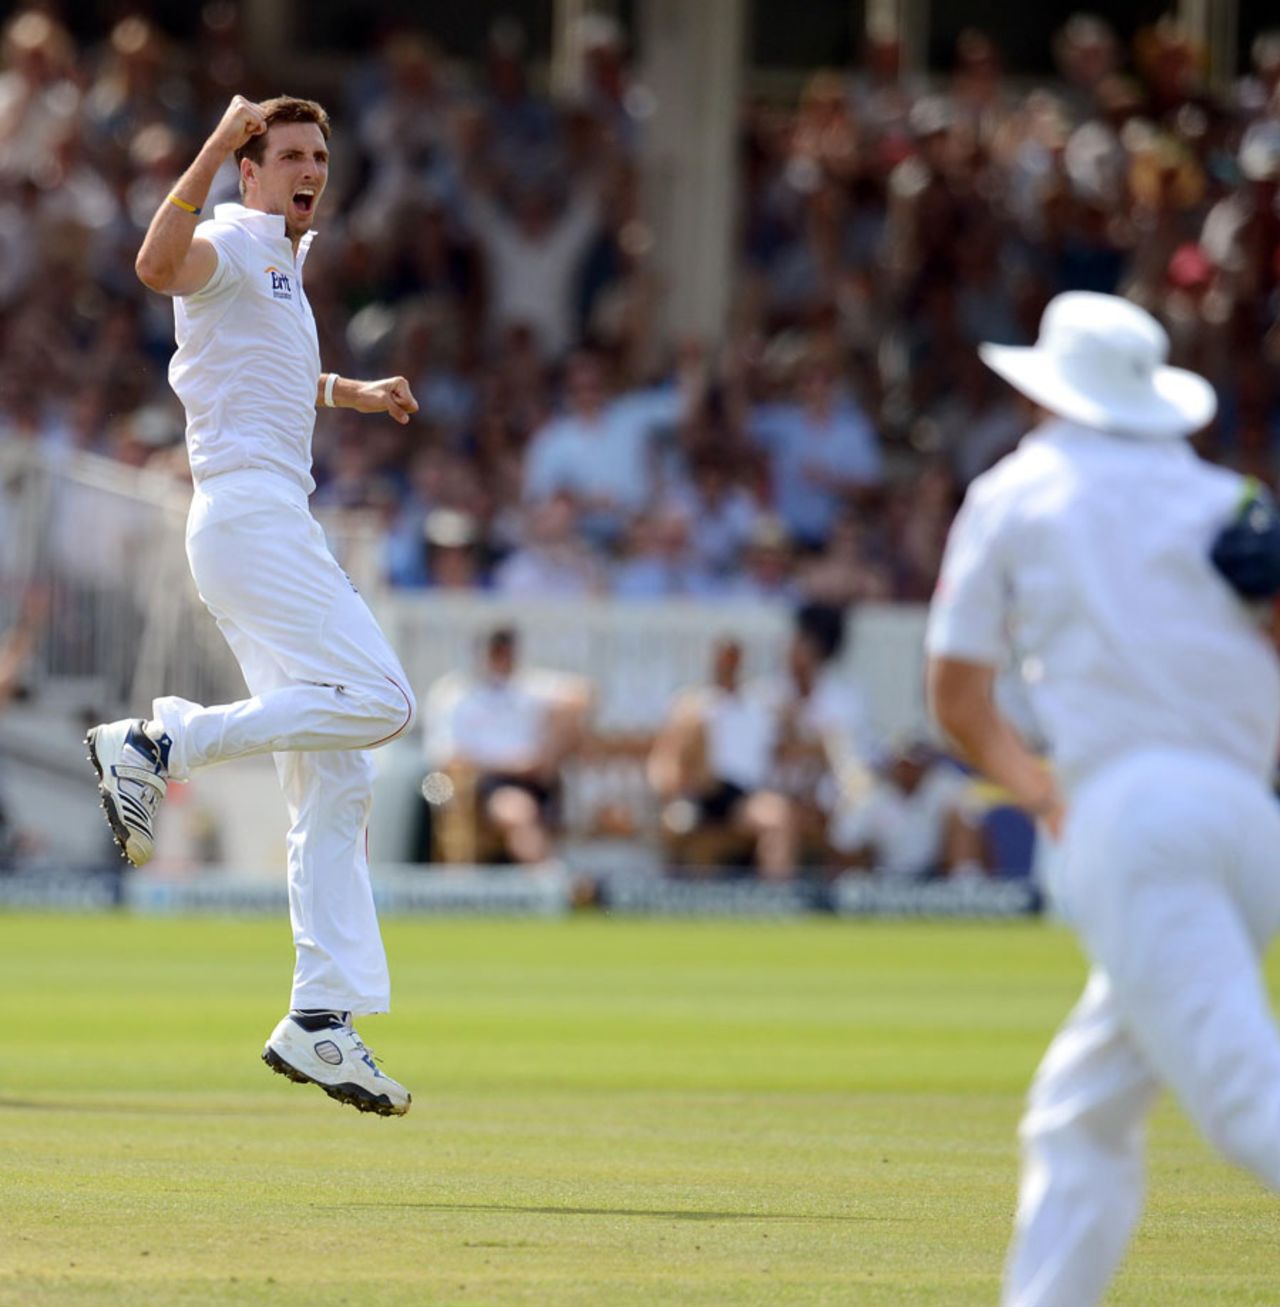 Steven Finn leaps in celebration of having AB de Villiers caught at slip, England v South Africa, 3rd Investec Test, Lord's, 4th day, August 19, 2012